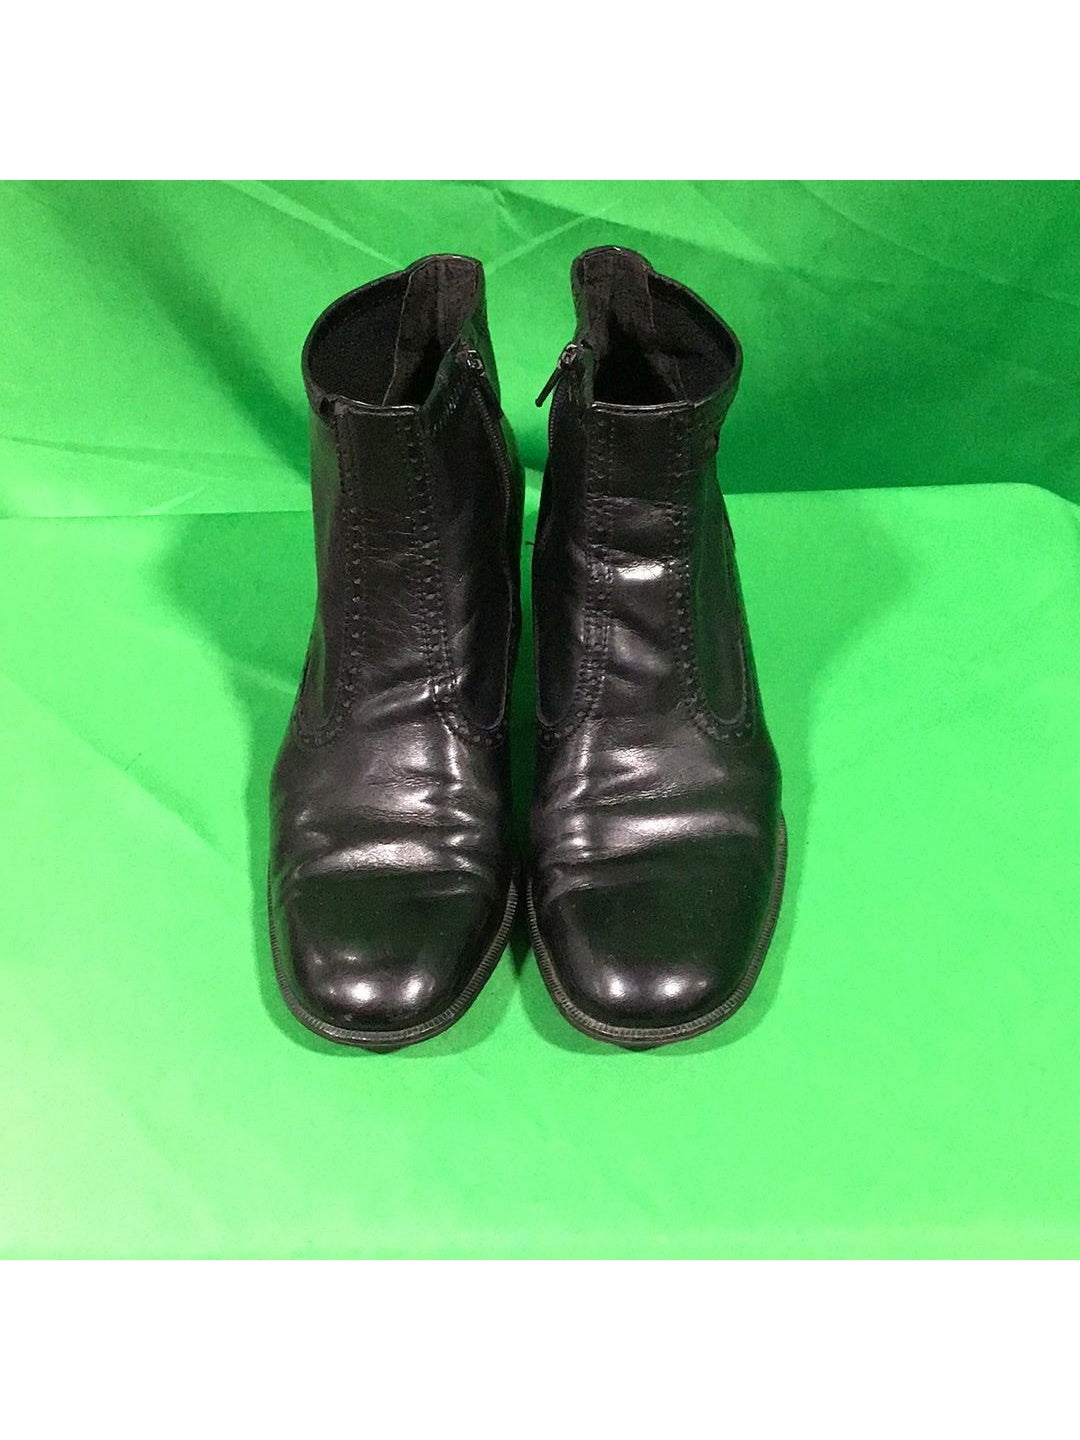 Franco Sarto Ladies Size 7 1/2 M Black Heels in Box - The Kennedy Collective Thrift - 